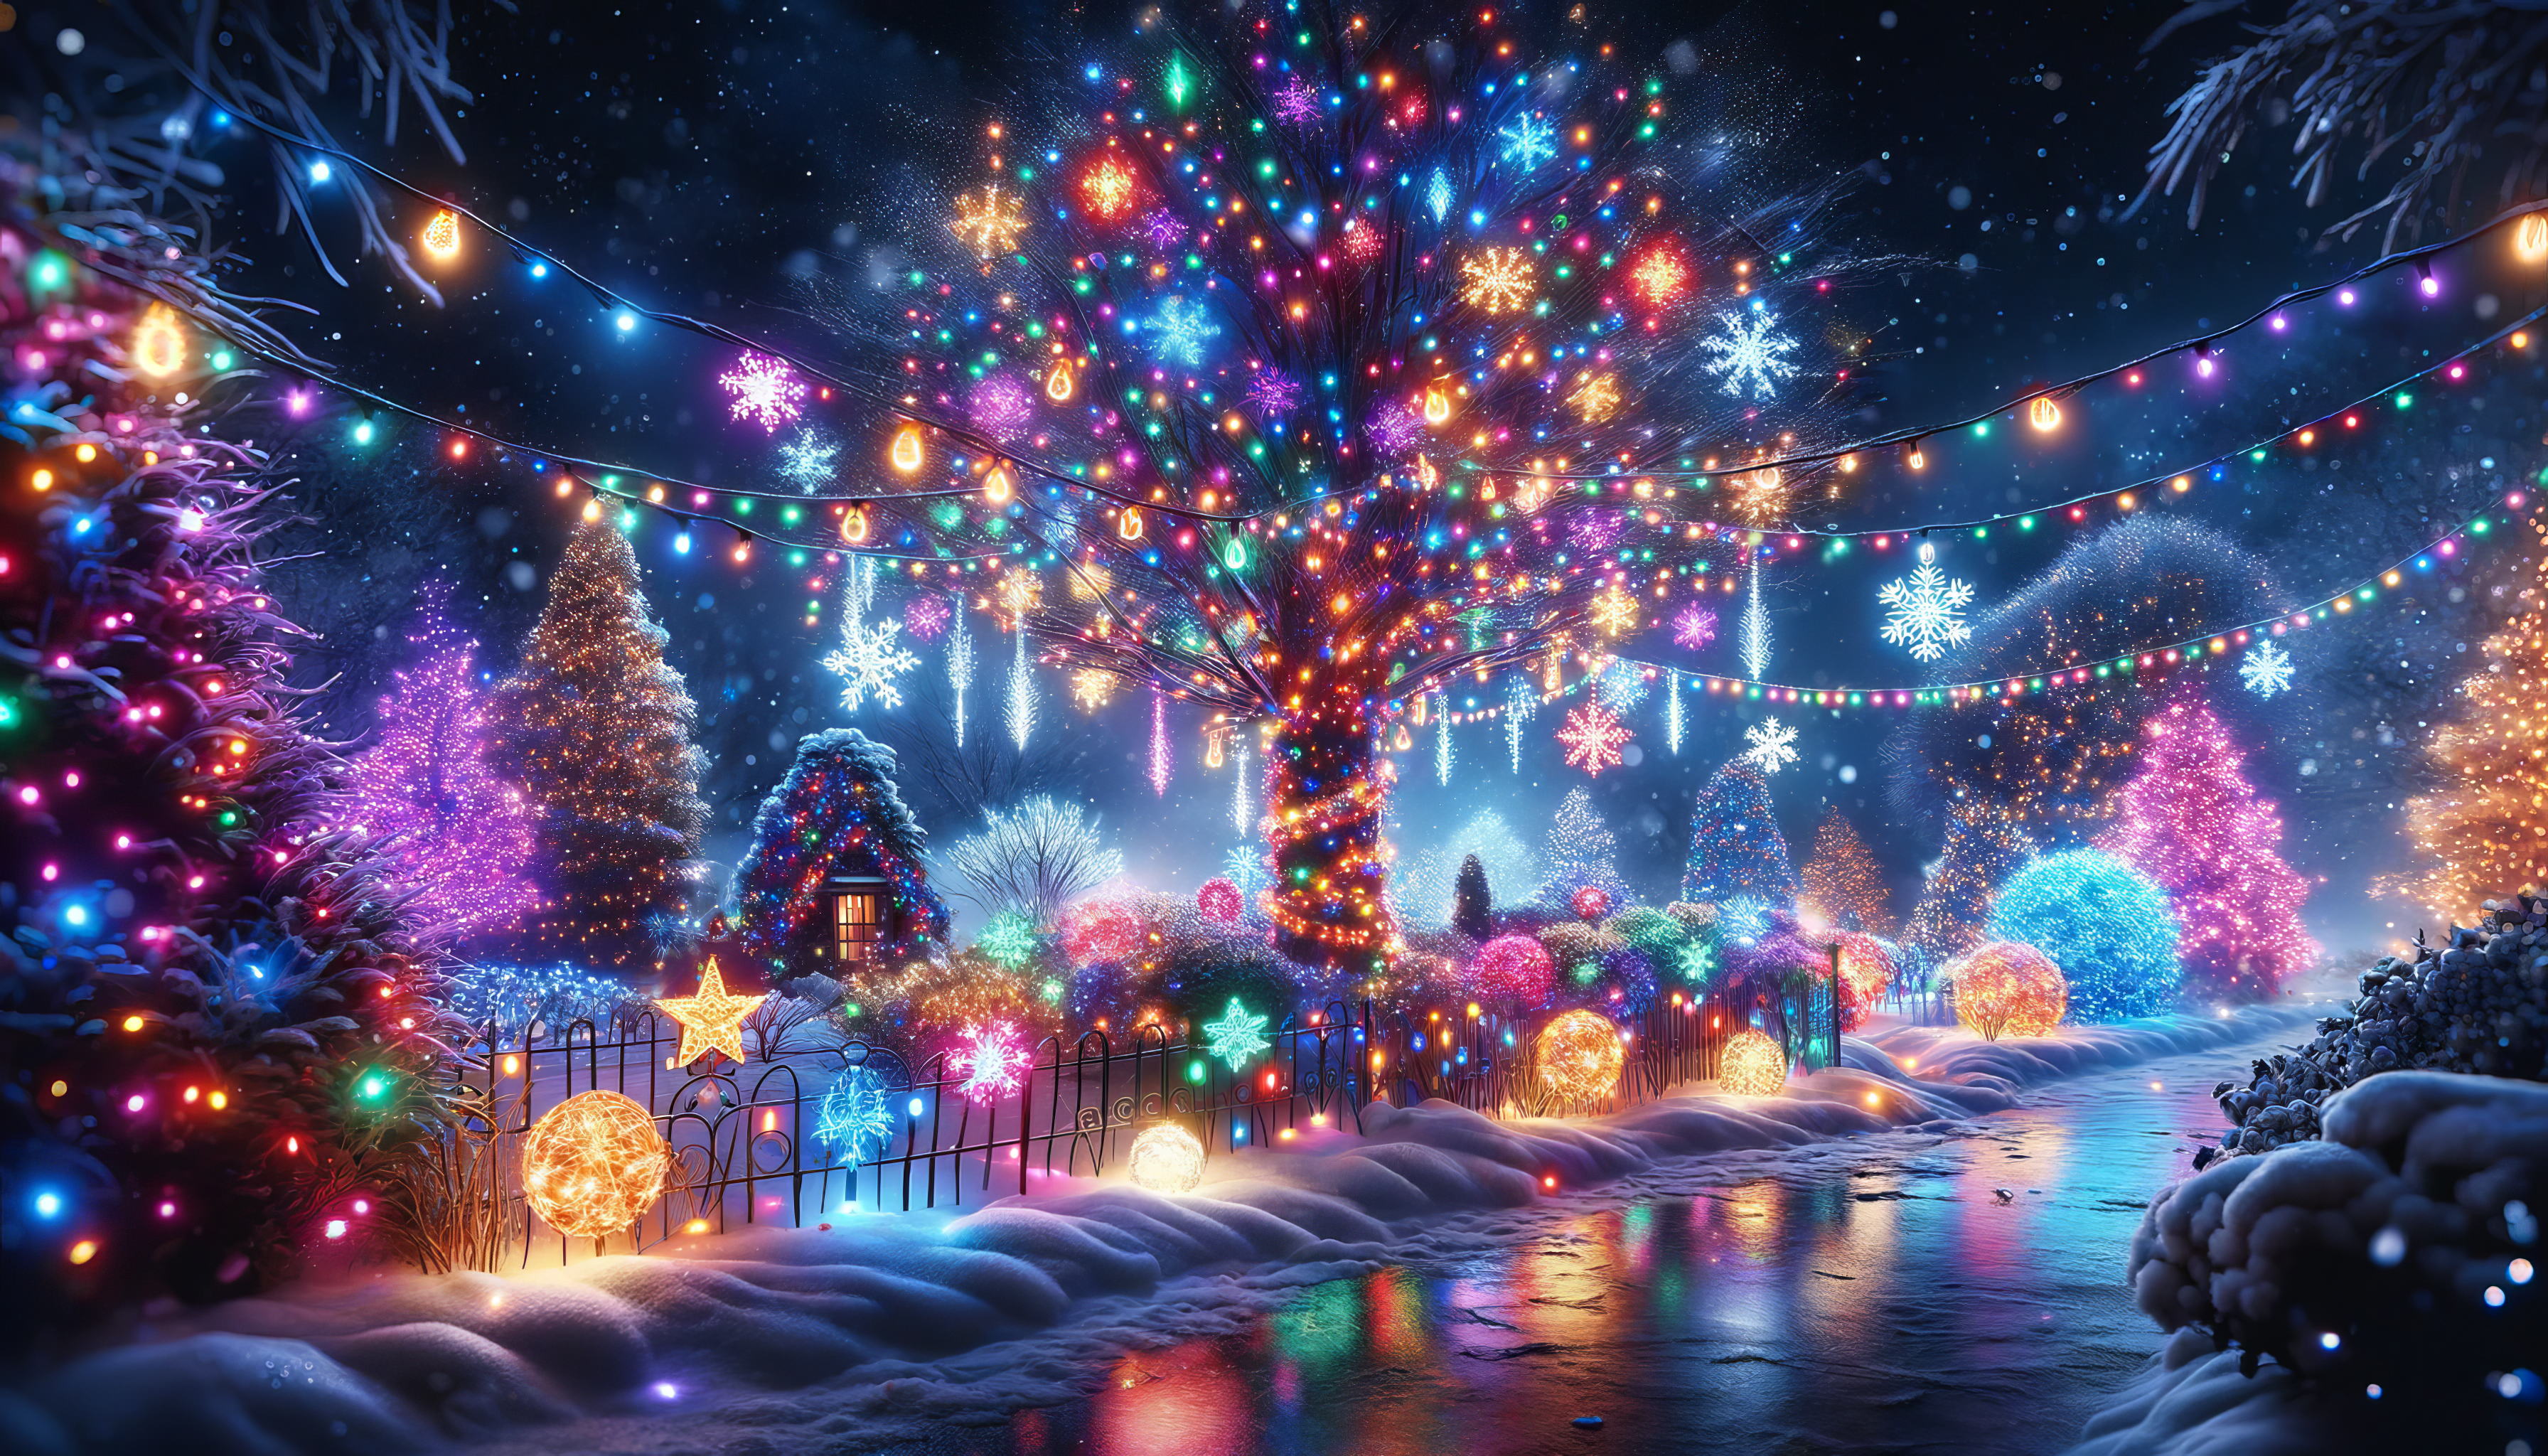 100000+ HD Winter Wallpaper Photos for Free Download on Pngtree